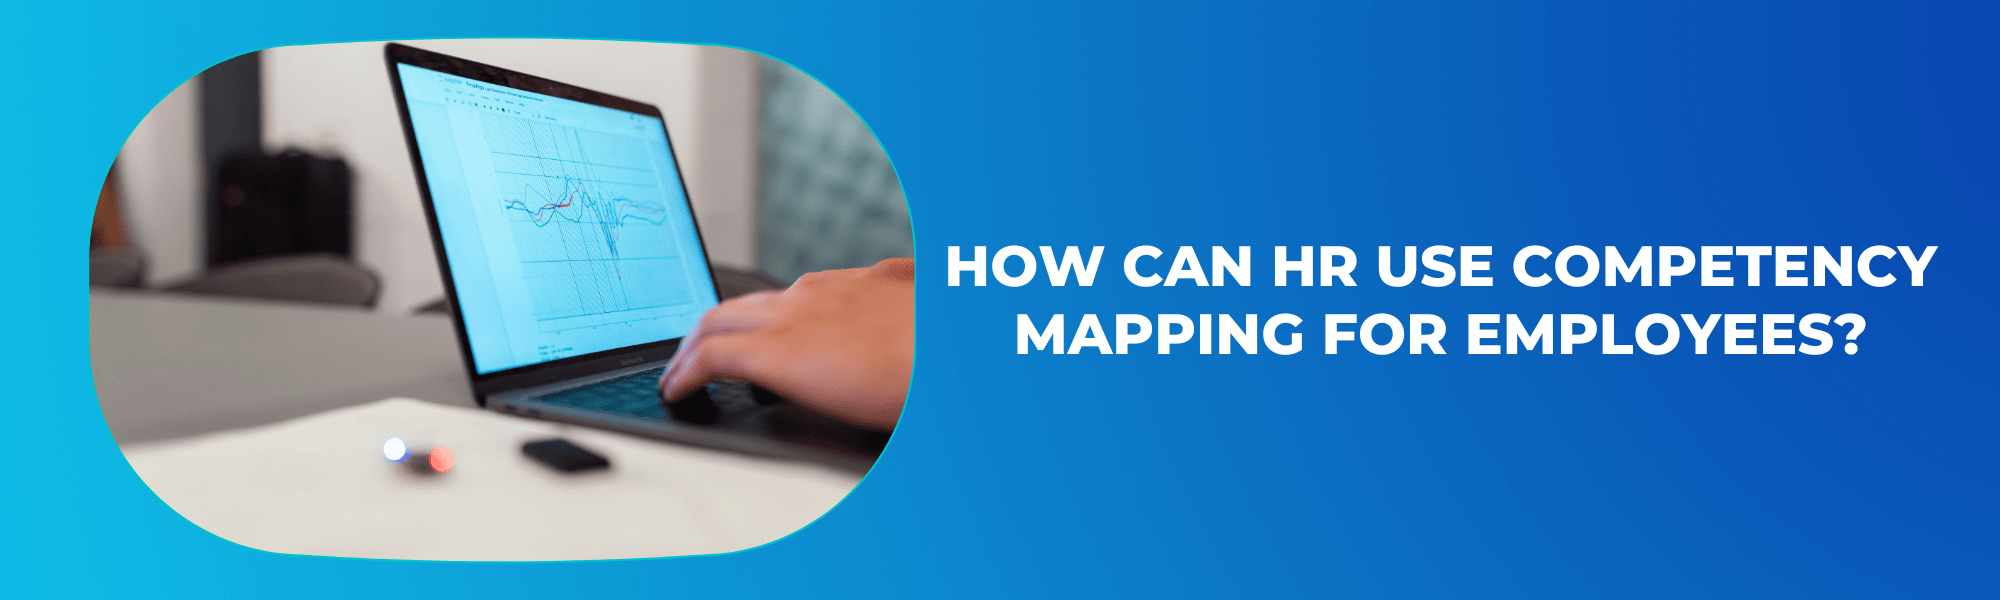 How can HR use competency mapping for employees?